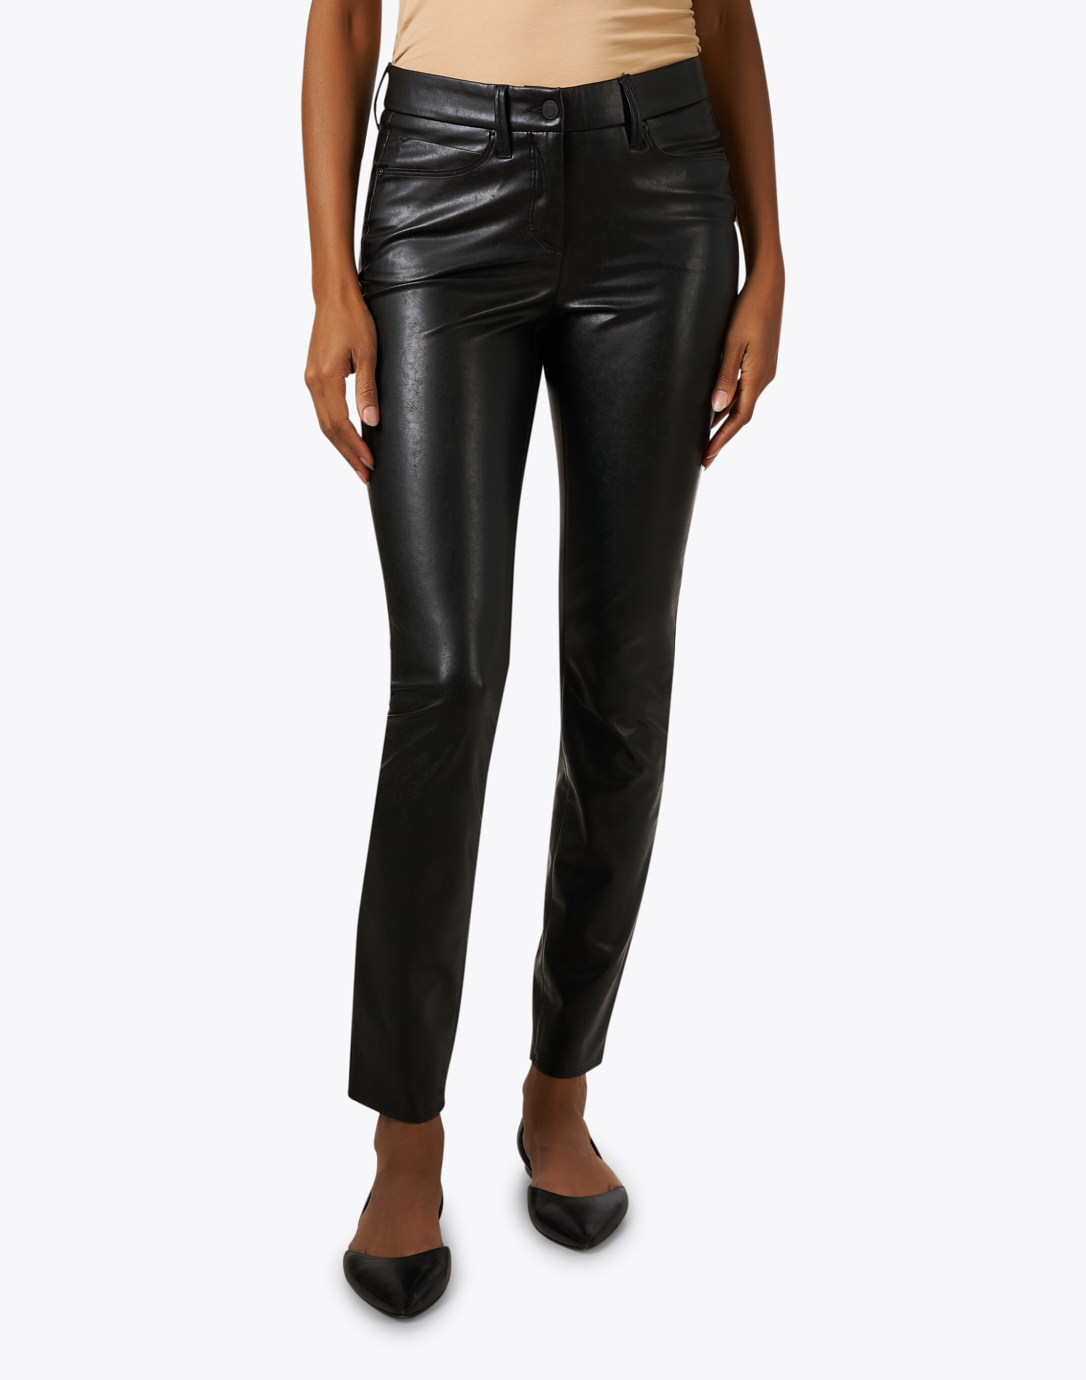 Black Stretch Faux Vegan Leather Fabric - Girl Charlee